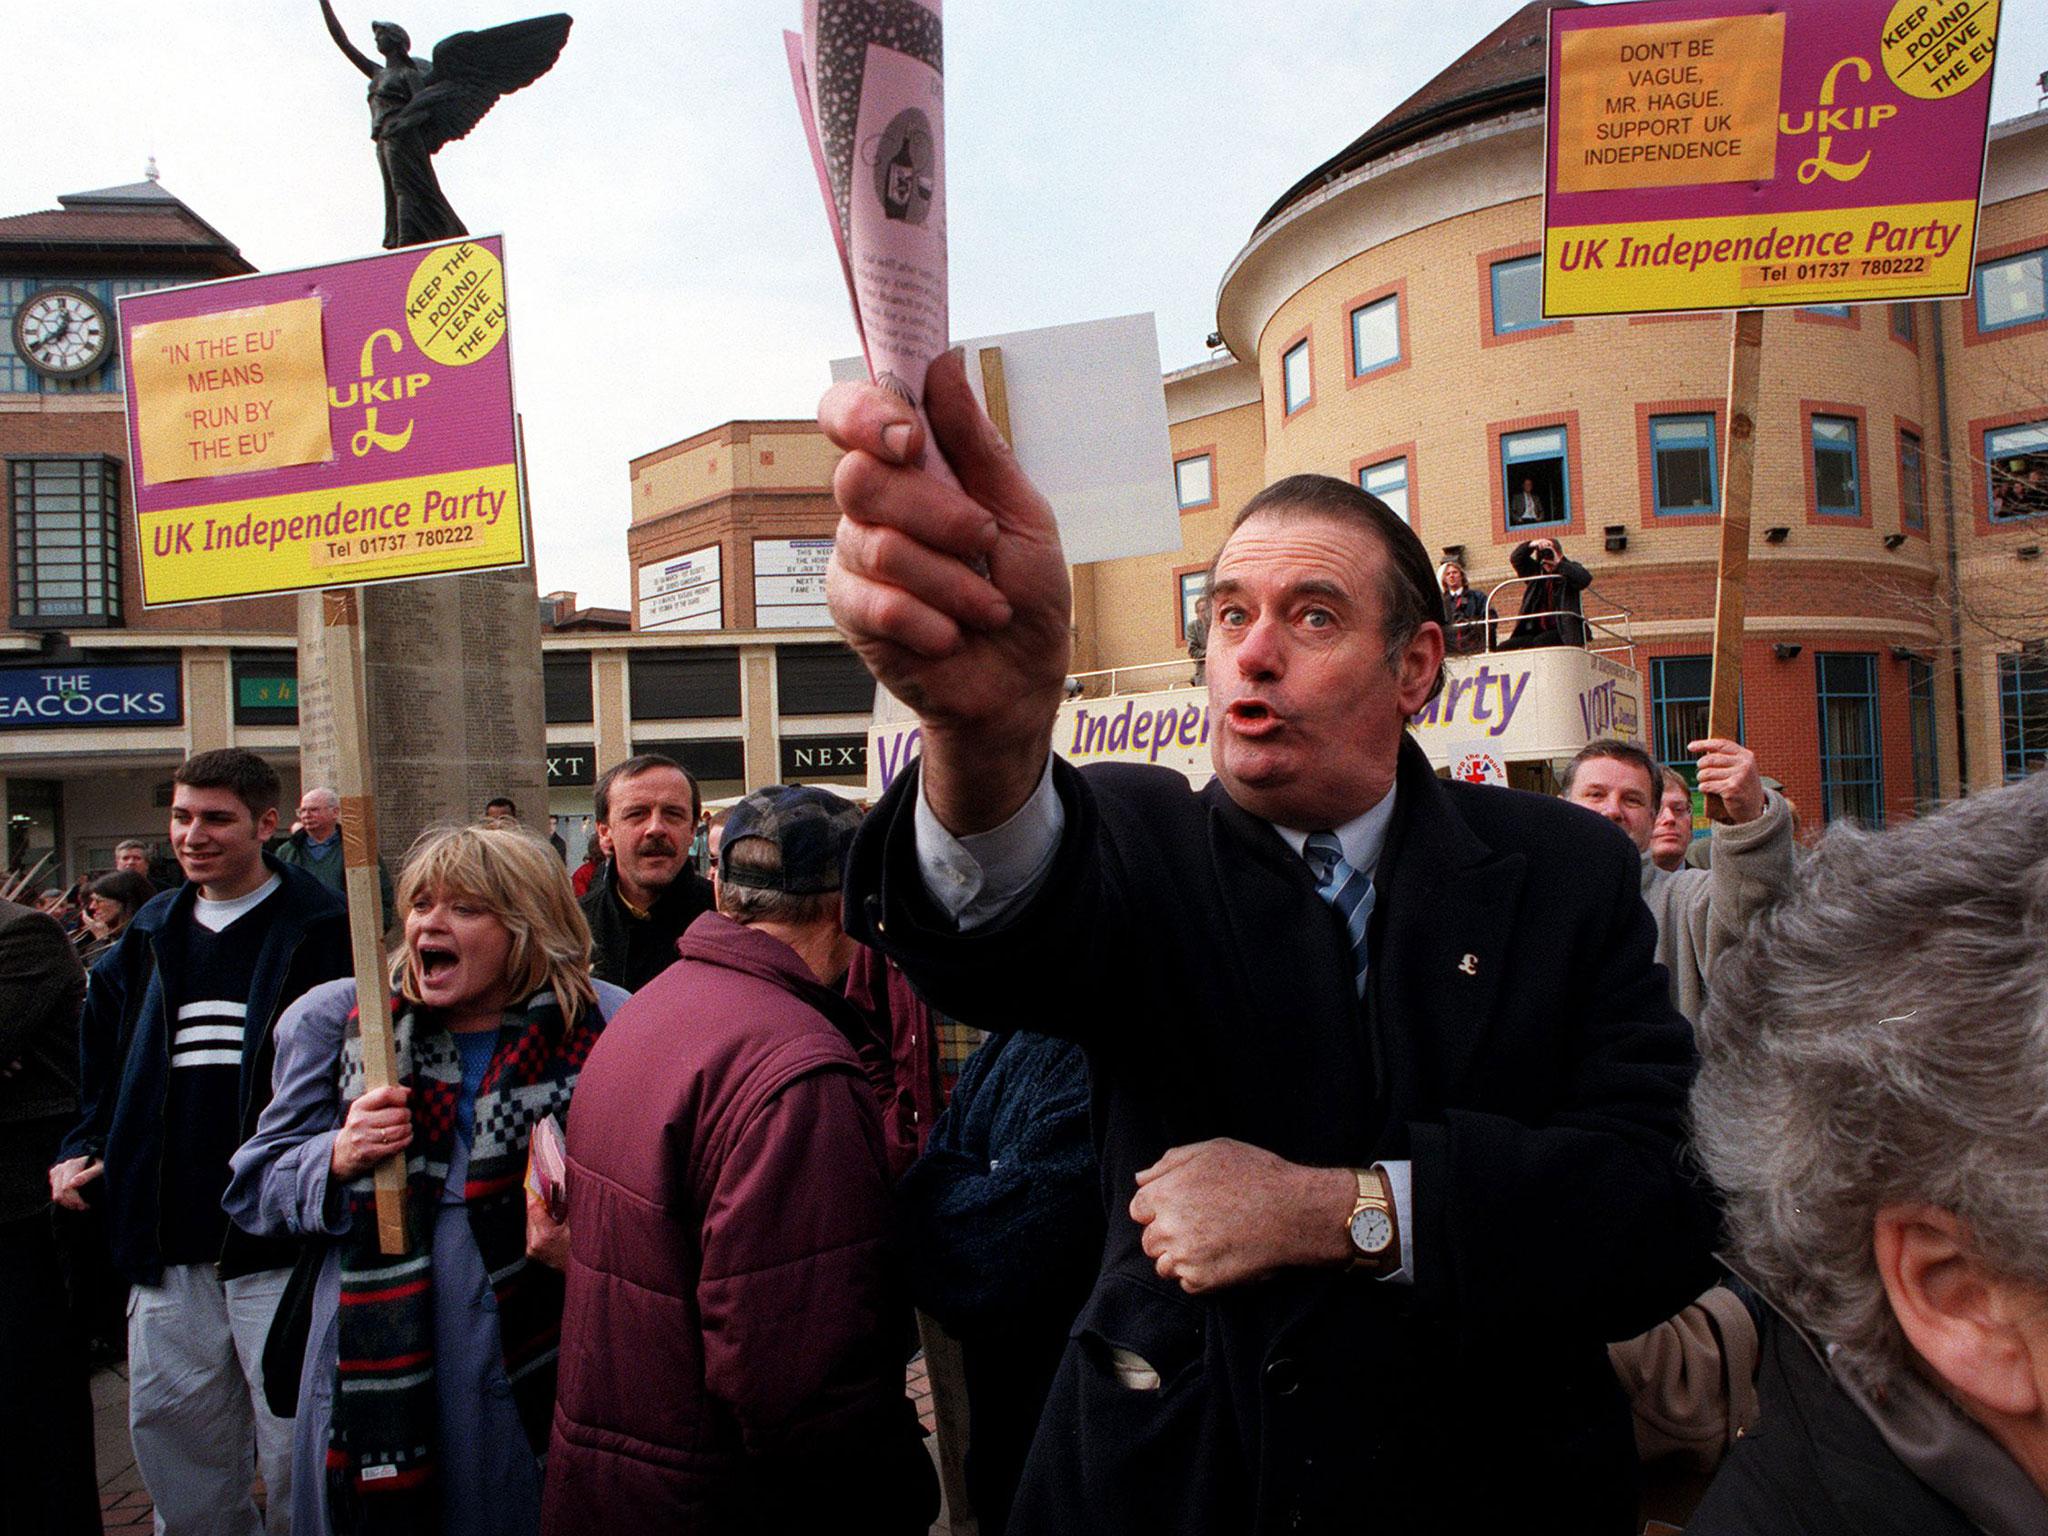 UKIP protesters during William Hague’s ‘Save the Pound’ campaign visit to Woking in February, 2000